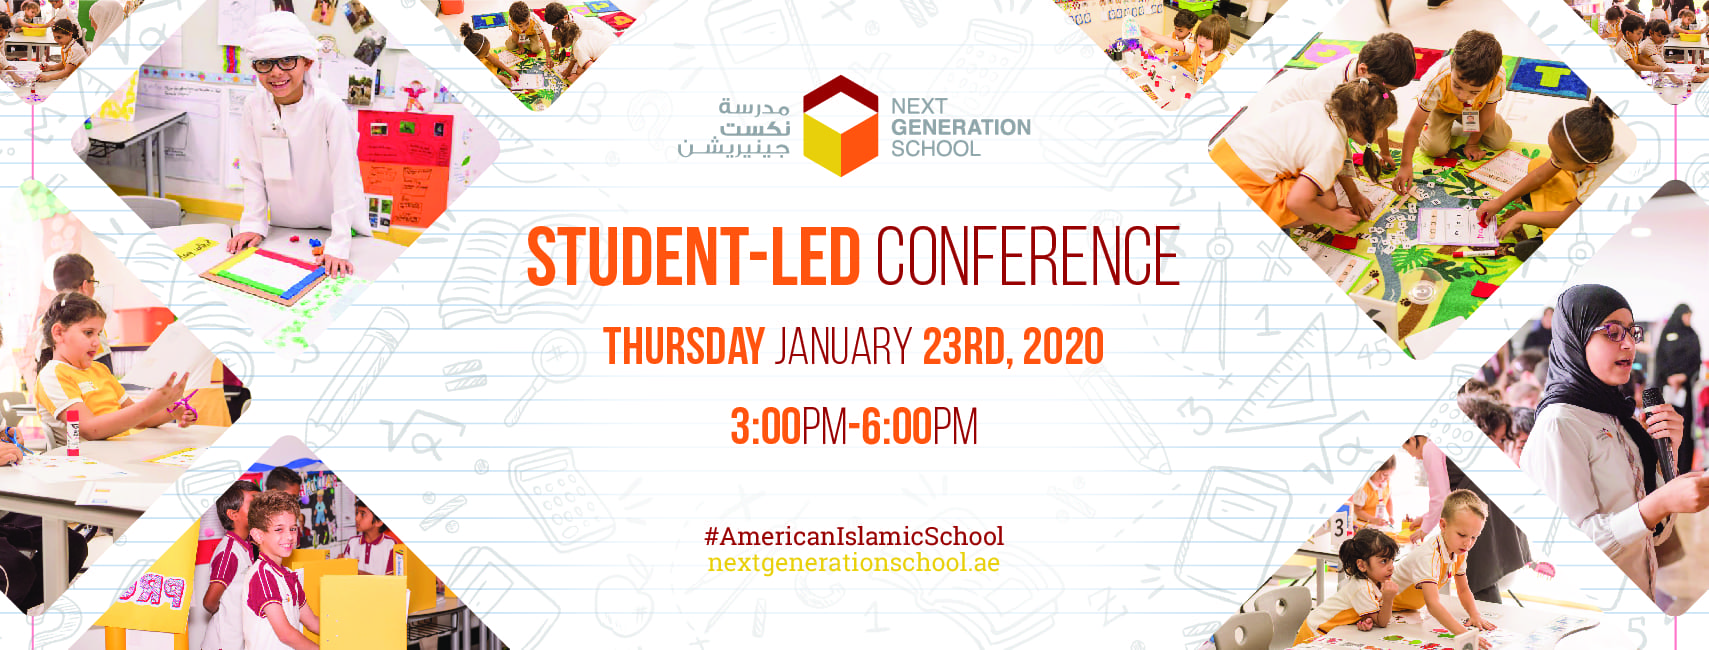 Student-Led Conference 